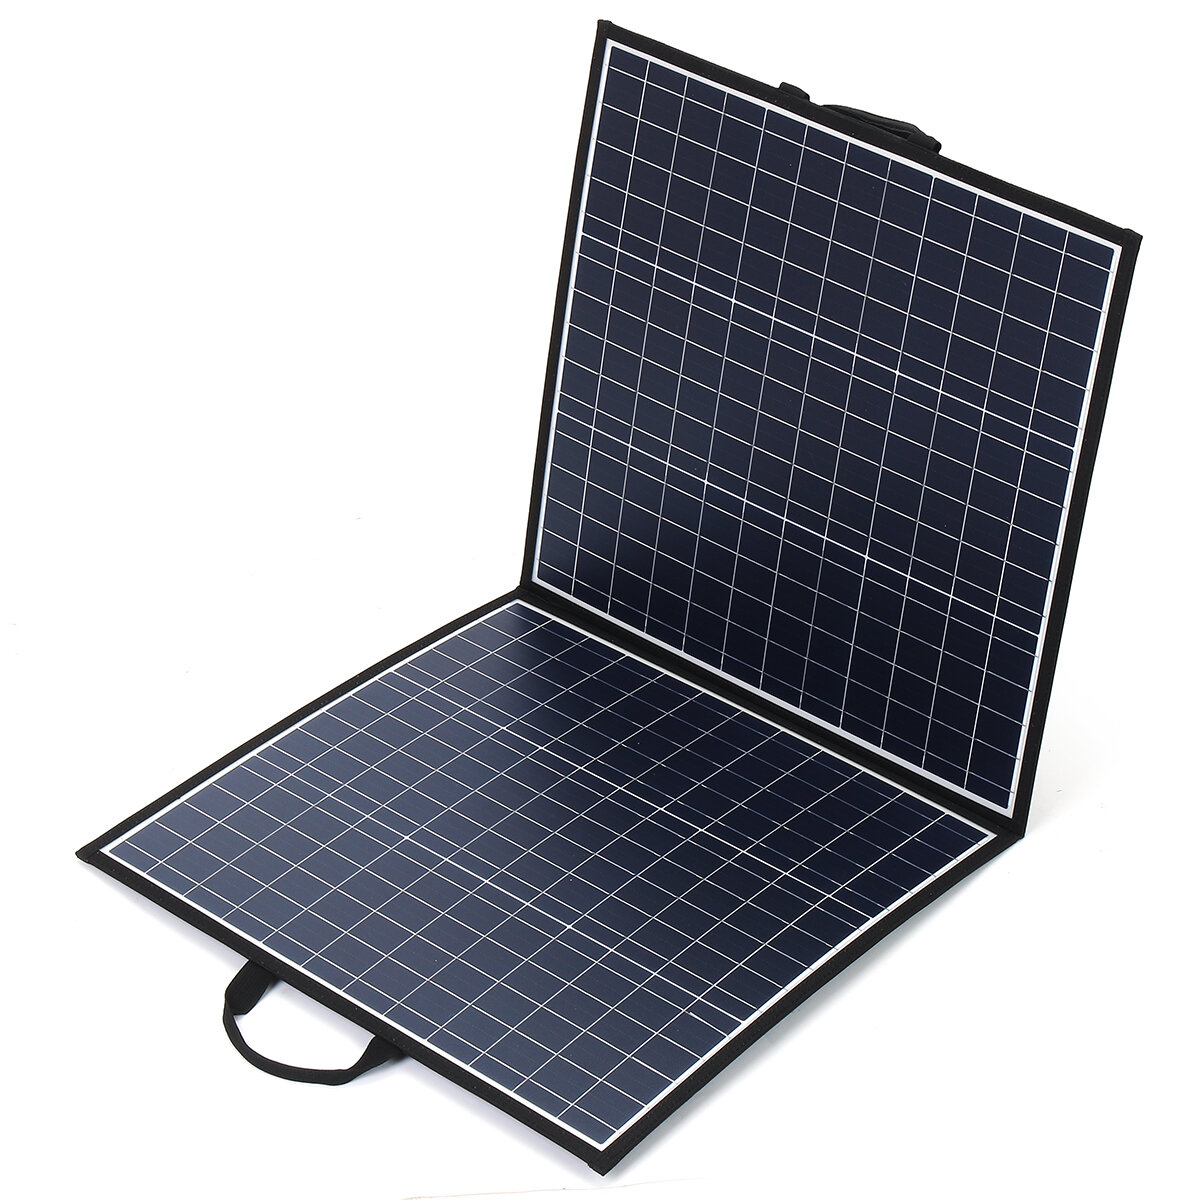 Image of ECSEE Portable Foldable 100W Solar Panel Charger USB Output For Outdoor Camping